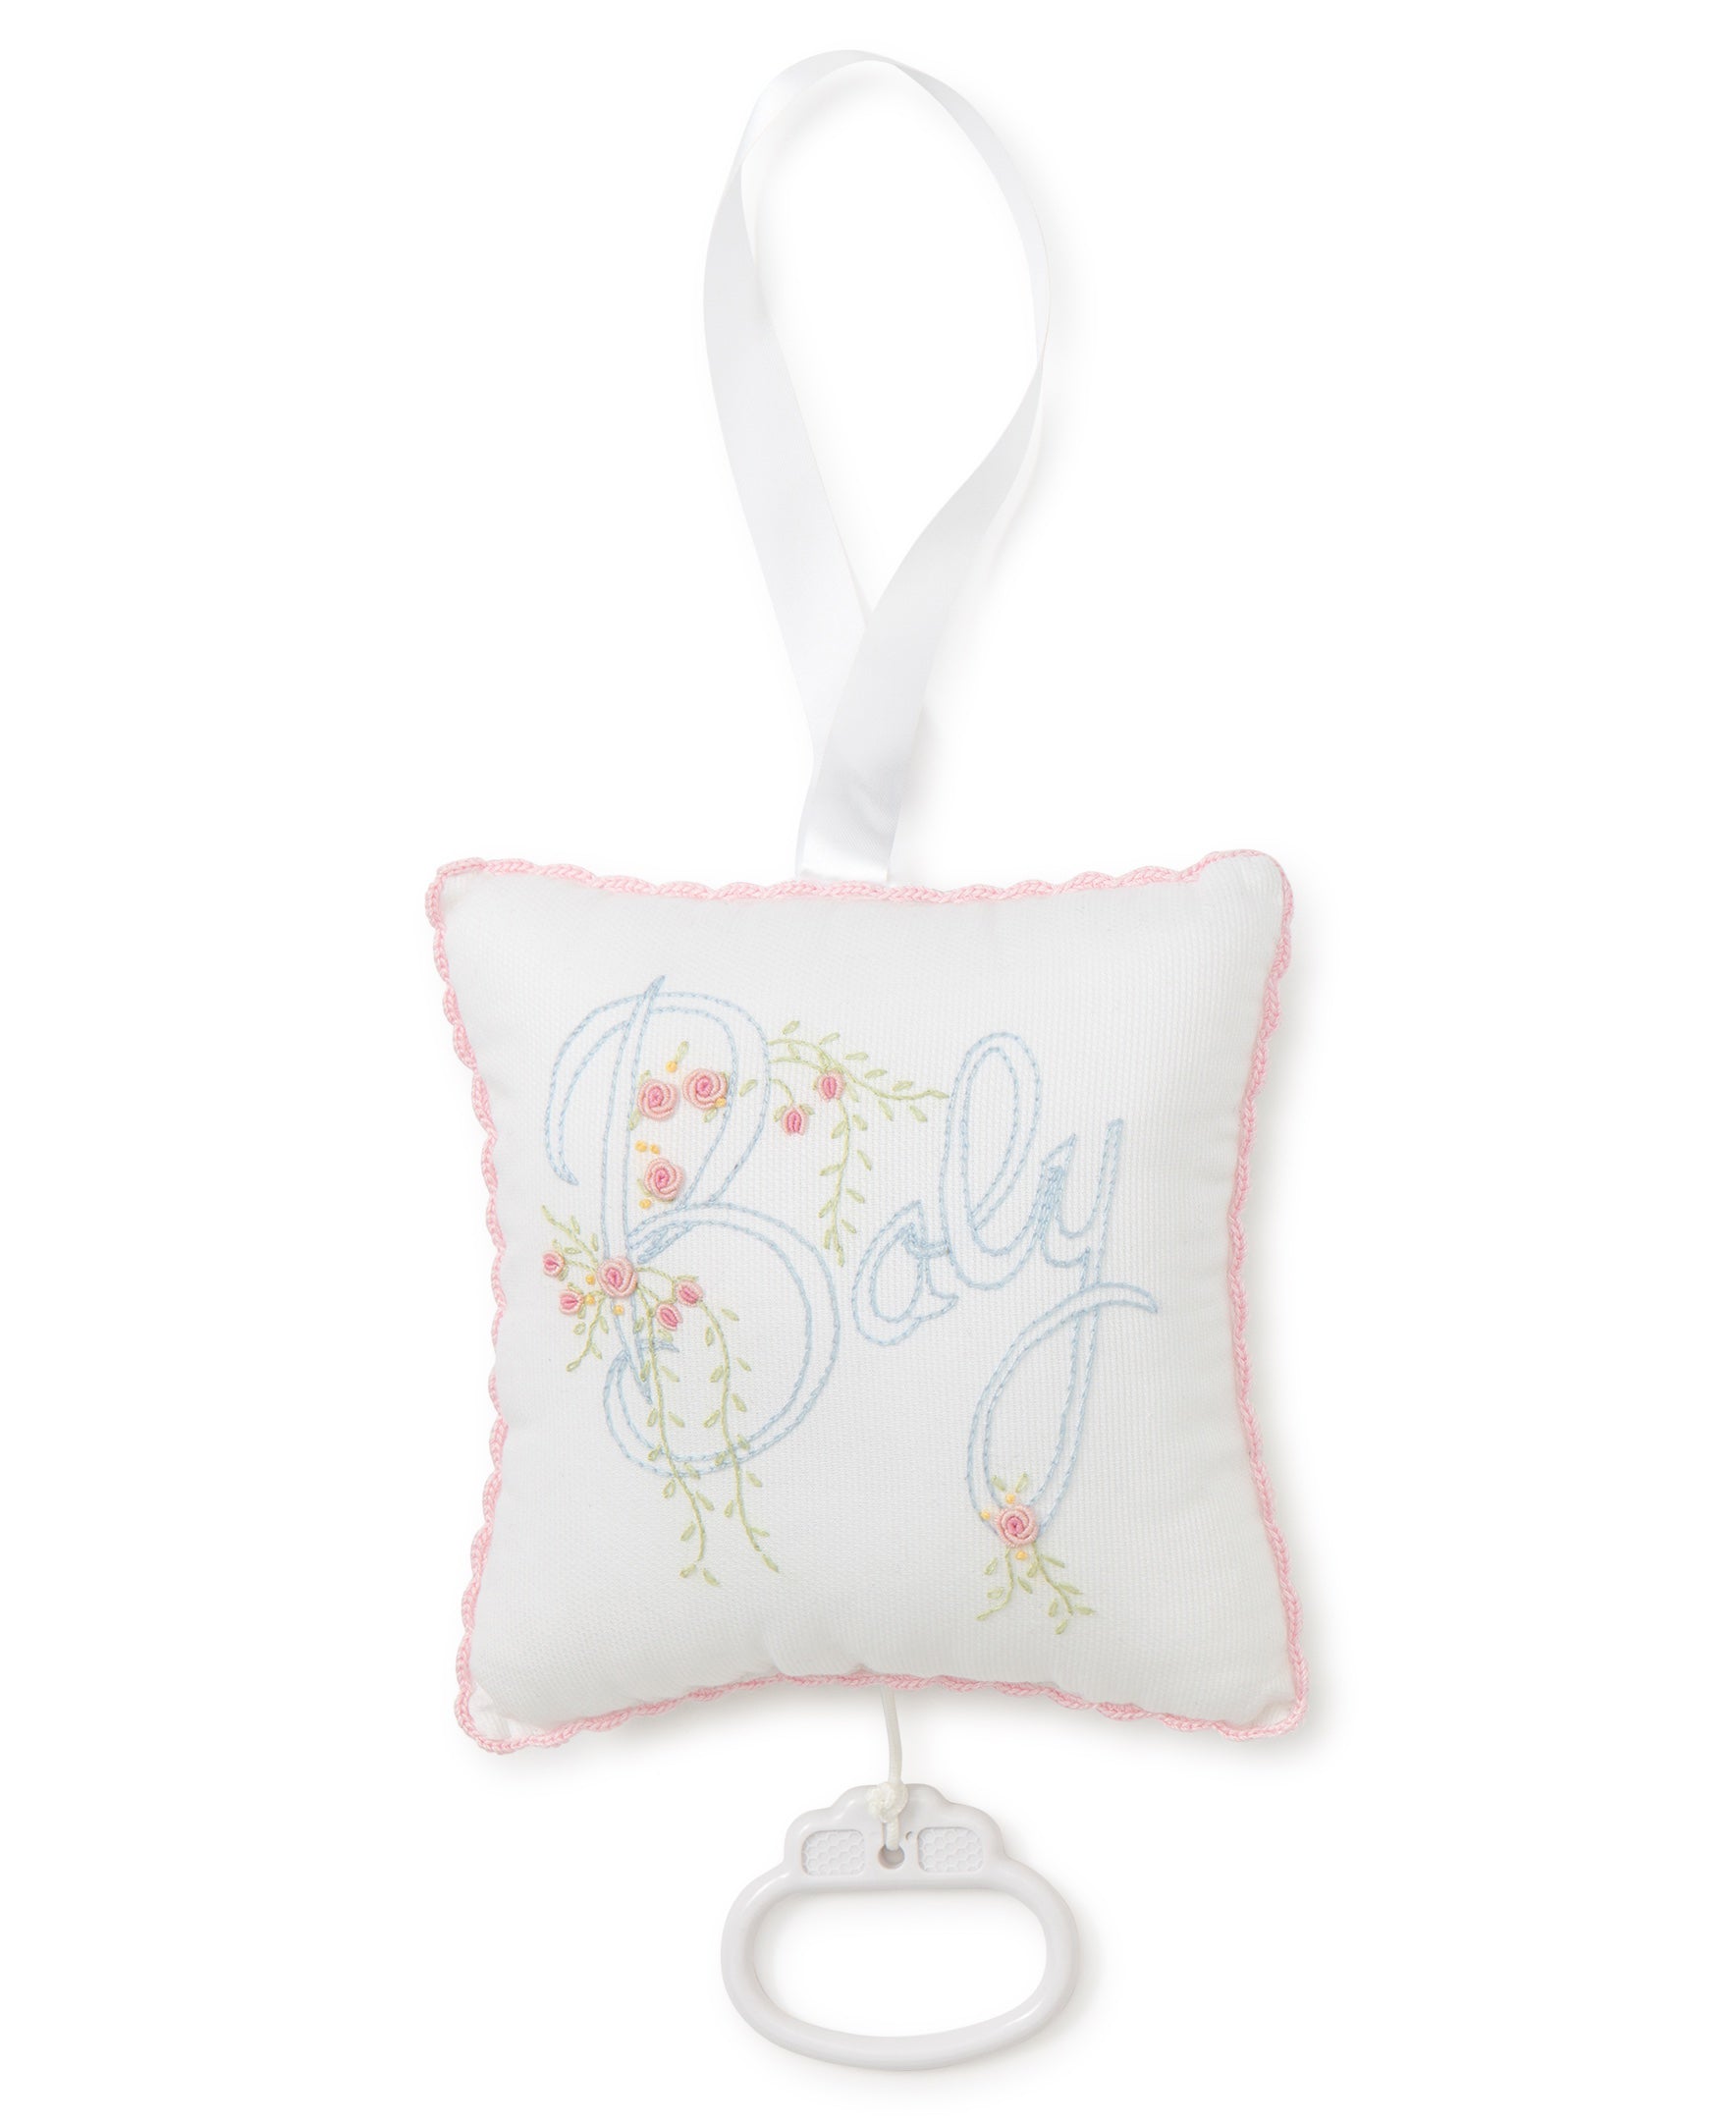 Pink "Baby" Musical Pillow - Kissy Kissy